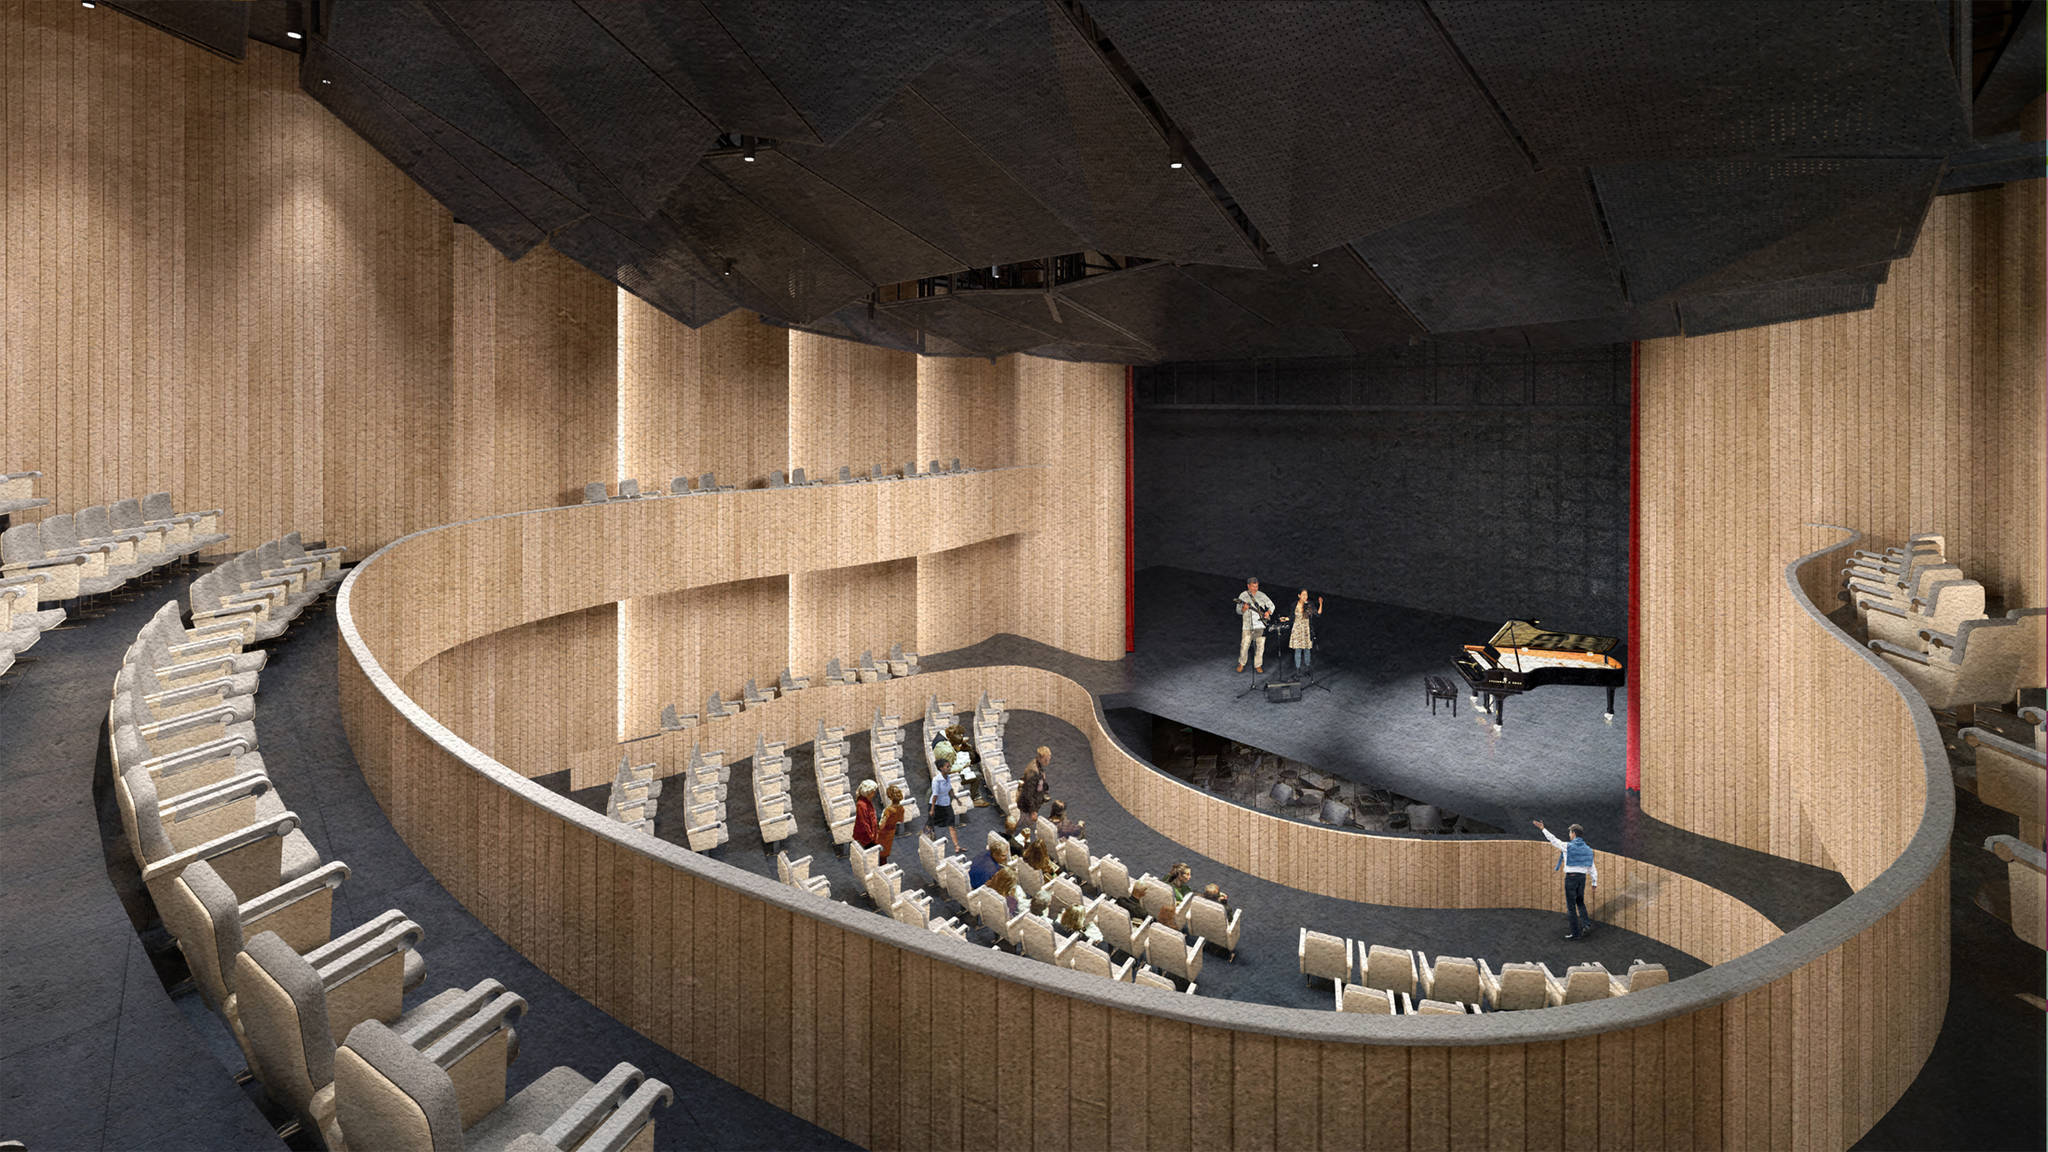 An artist rendering of the 300-seat theater in the new JACC, which will include a central seating area and a balcony. Courtesy image